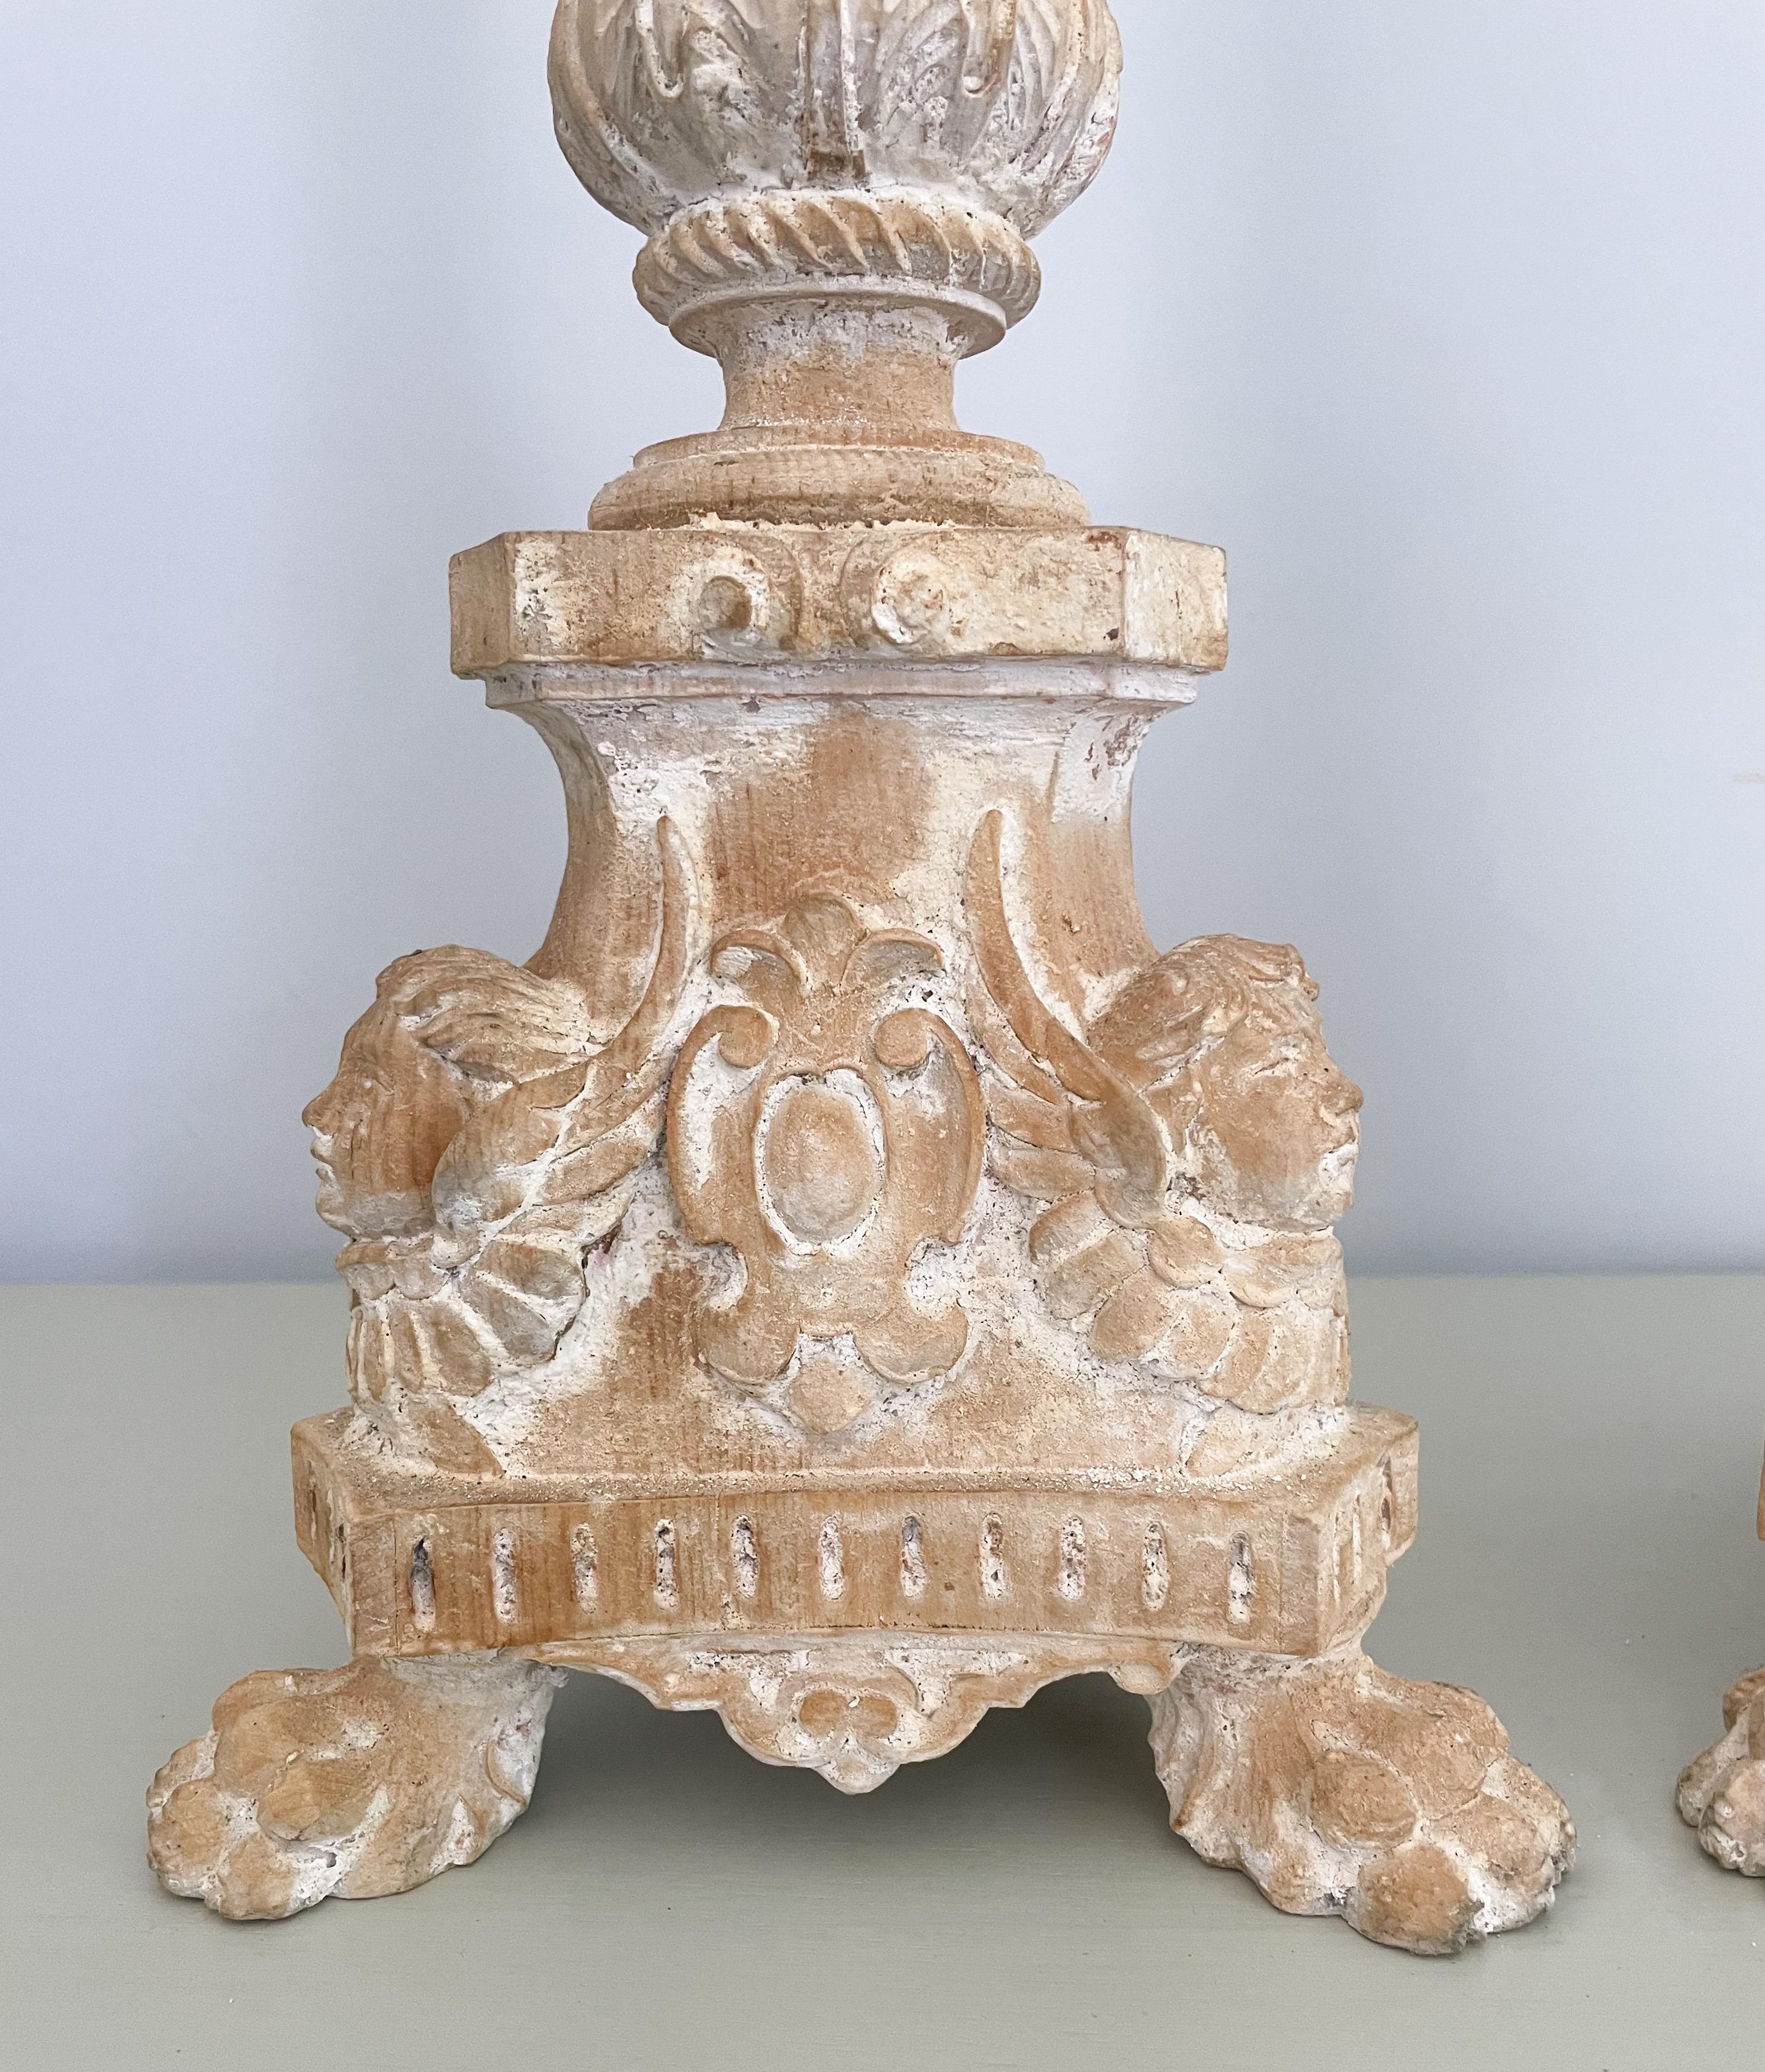 Baroque Italian Antique Carved Wood Pricket Lamps